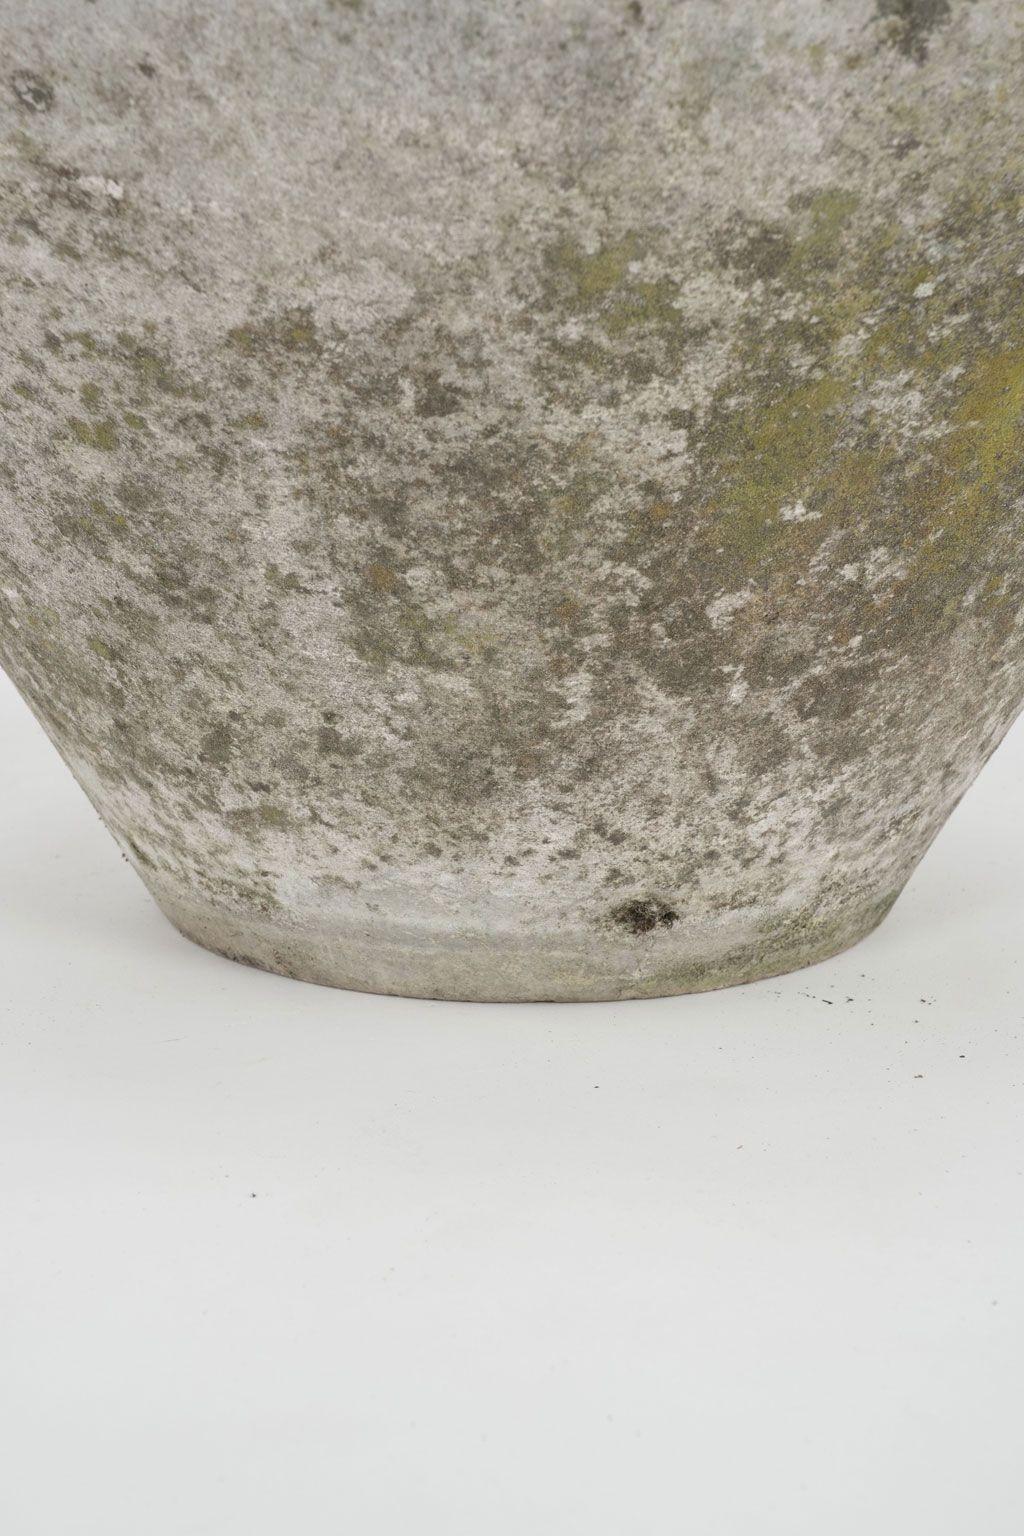 Mid-20th Century Tapered Round Concrete Willy Guhl Planter For Sale